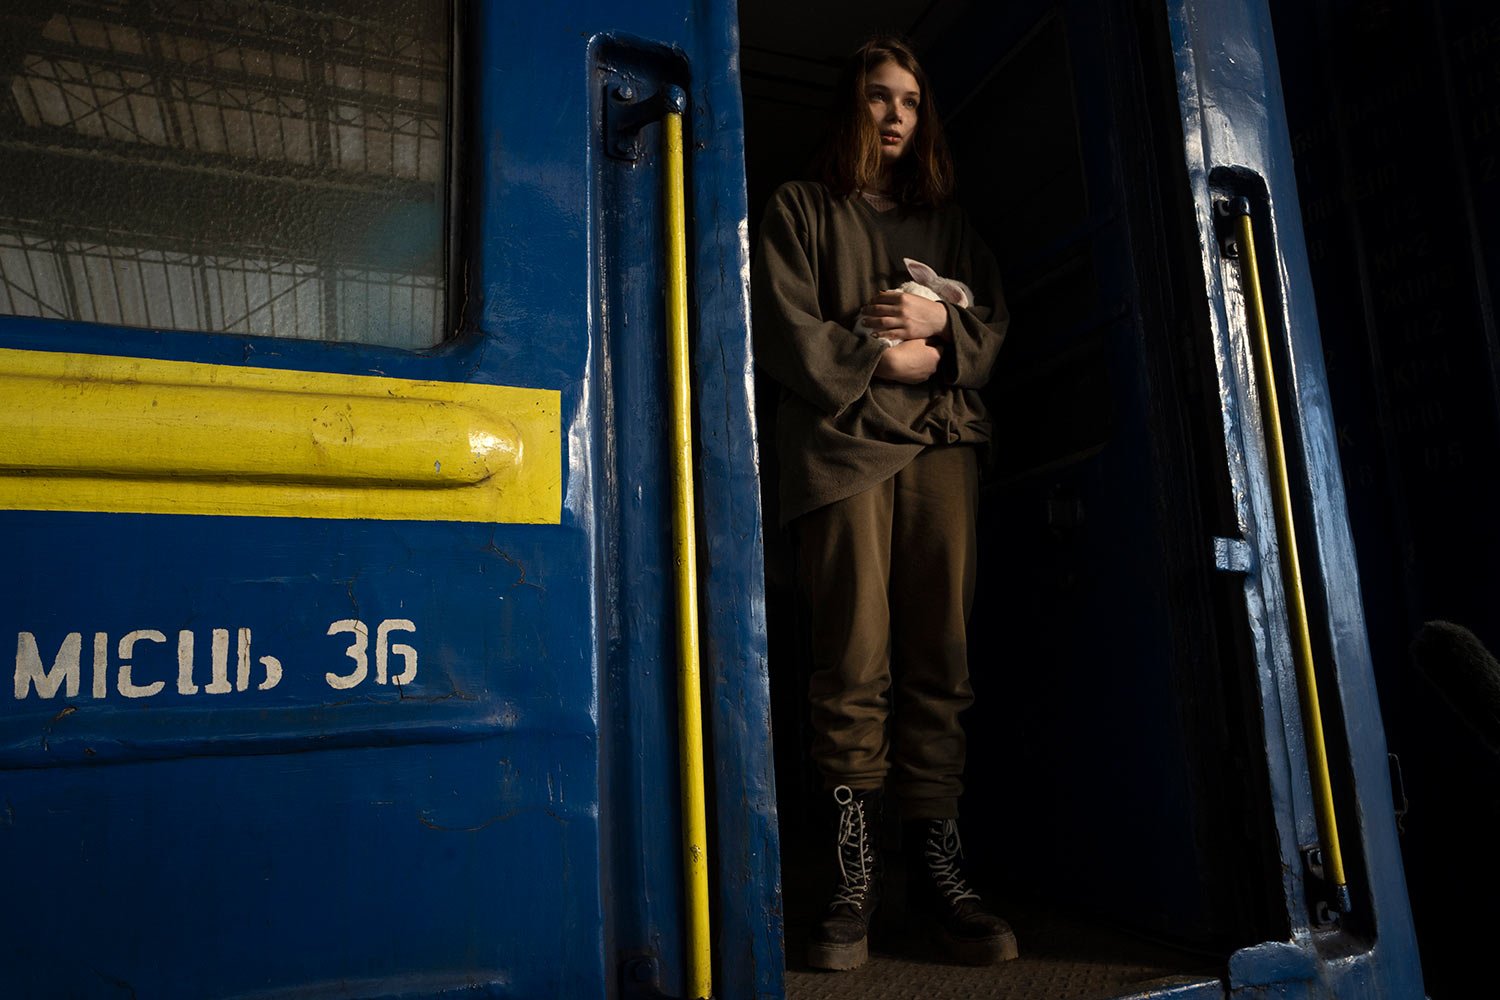  16-year-old Julia from Dnipro, who is traveling alone, holds her pet rabbit Baby after arriving to the Lviv main station, western Ukraine, Thursday, March 24, 2022. She was on her way to join her mother and then go on to Poland or Germany. (AP Photo